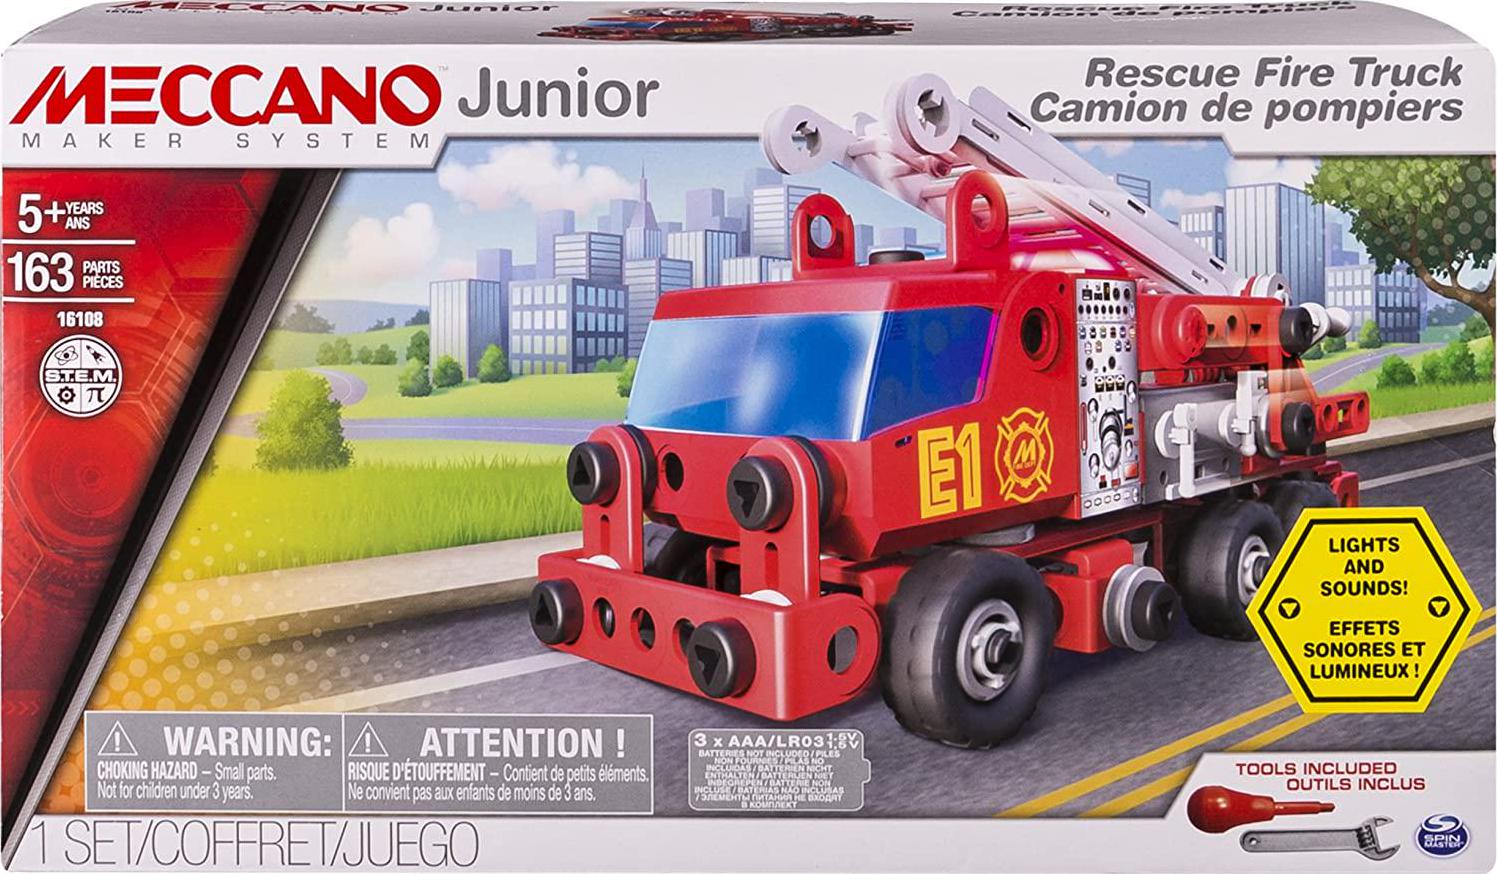 MECCANO, Meccano Junior Rescue Fire Truck with Lights and Sounds Model Building Kit